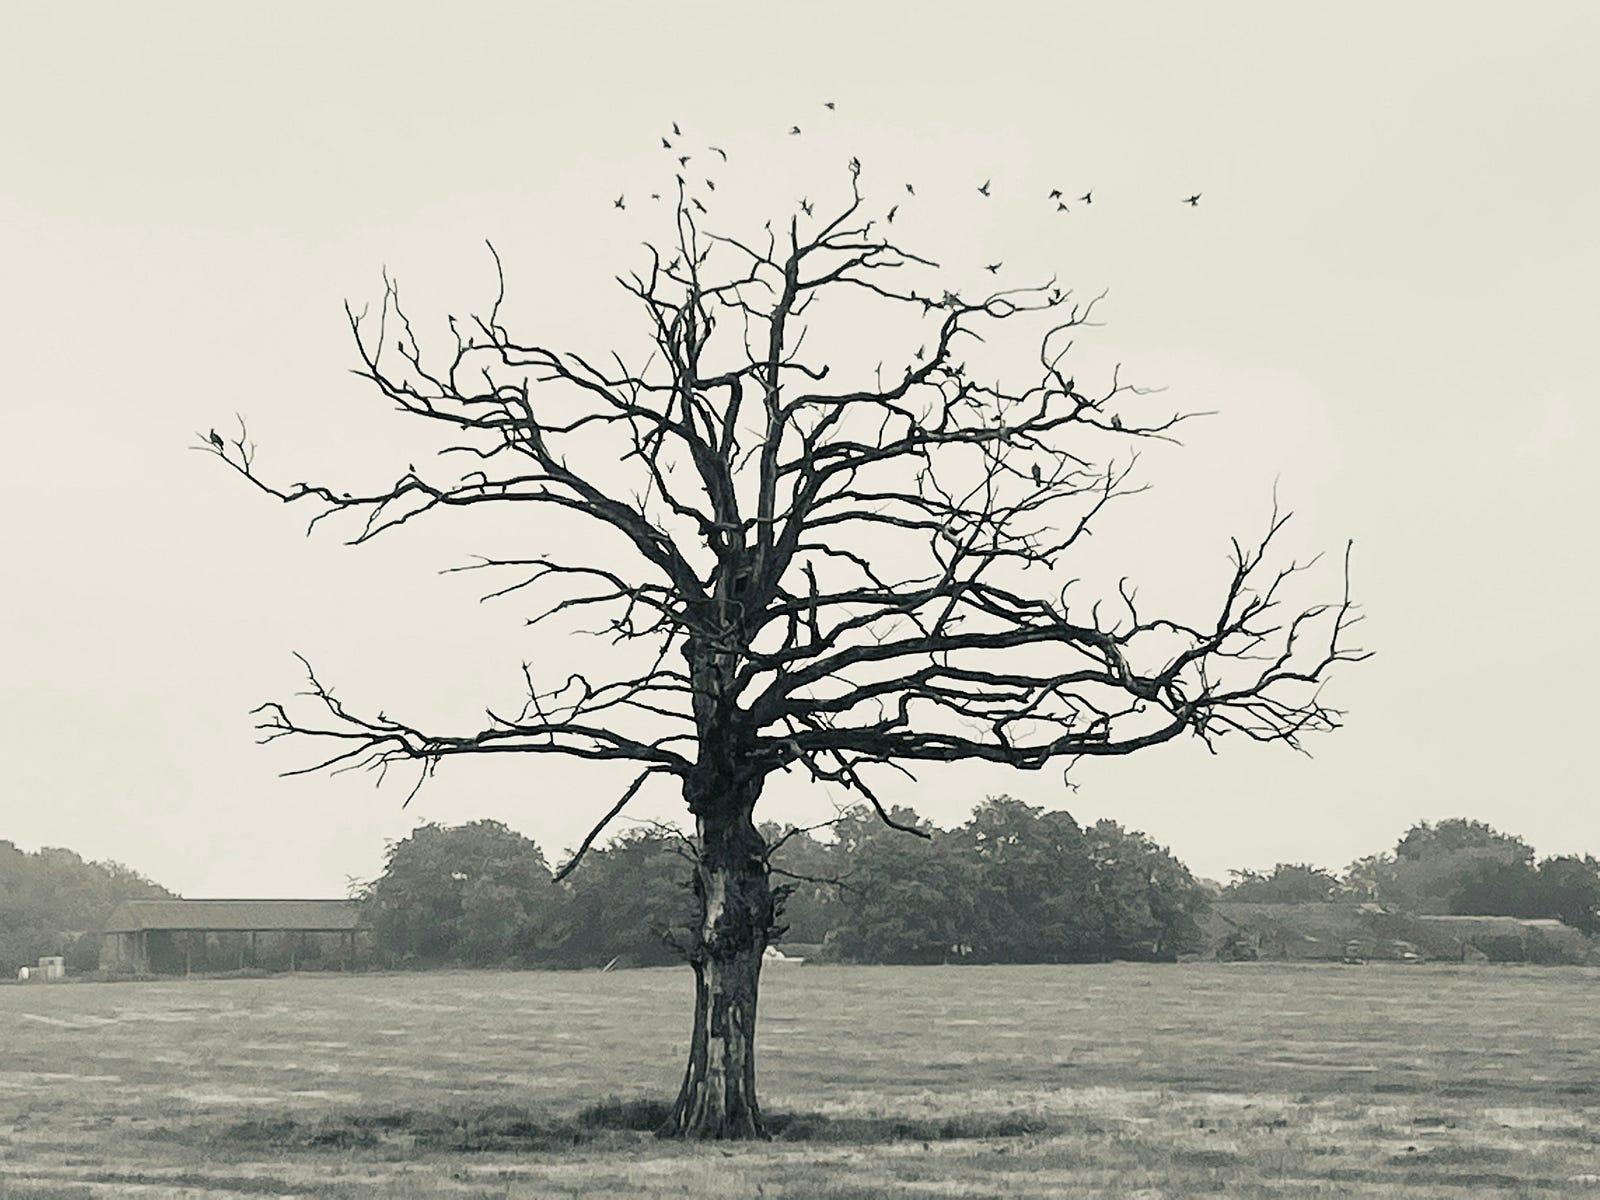 A barren tree, arms extended. Black and white image.